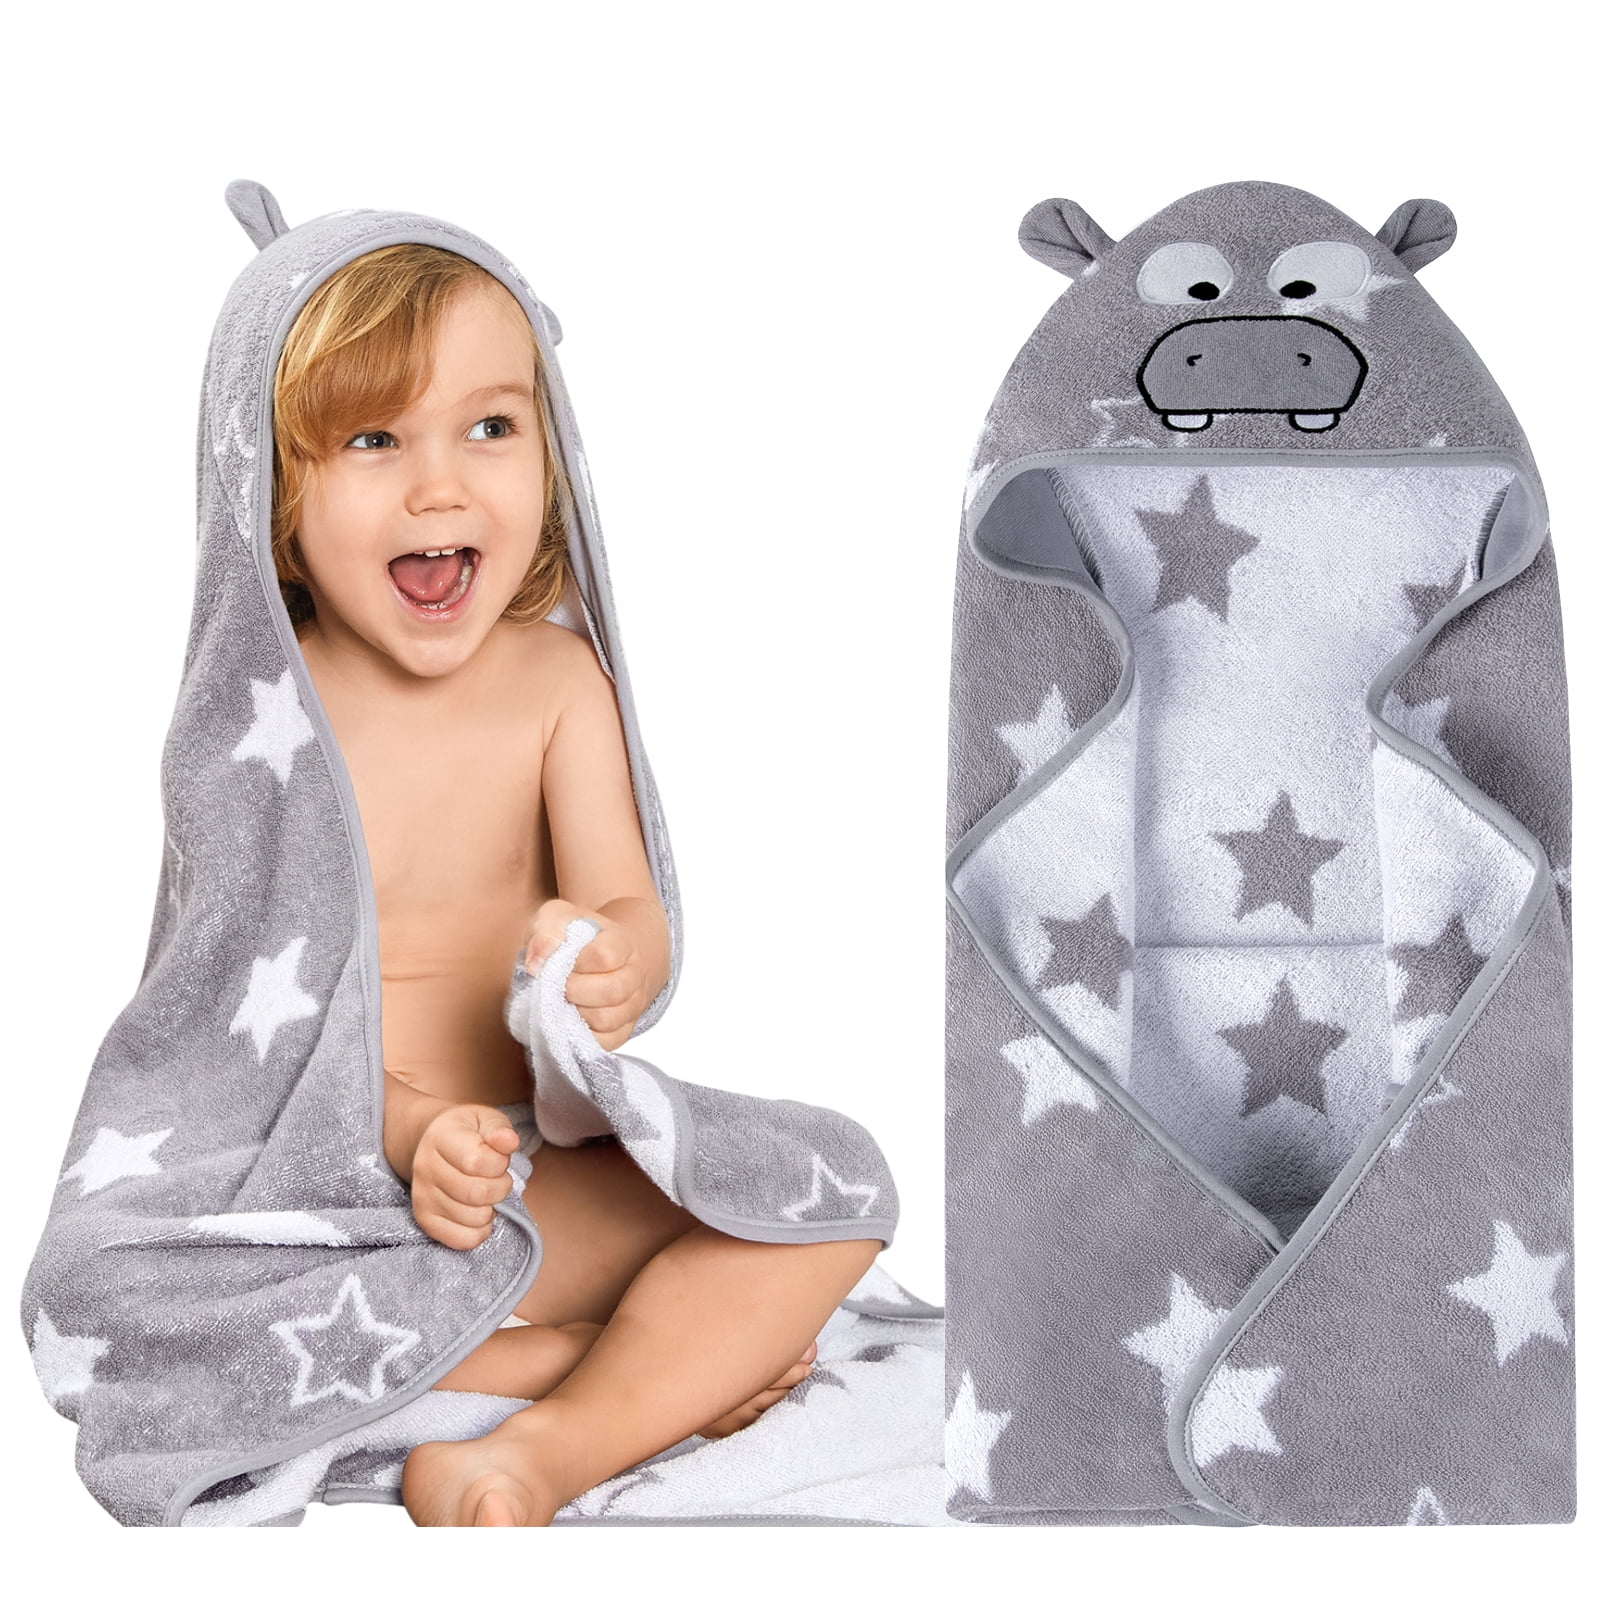 E-More Hooded Towels for Kids Puppy Design Hooded Baby Towel Soft and Super Absorbent Kids Bath Towel Children 100% Cotton Bath Towel with Hood for Girls & Boys 